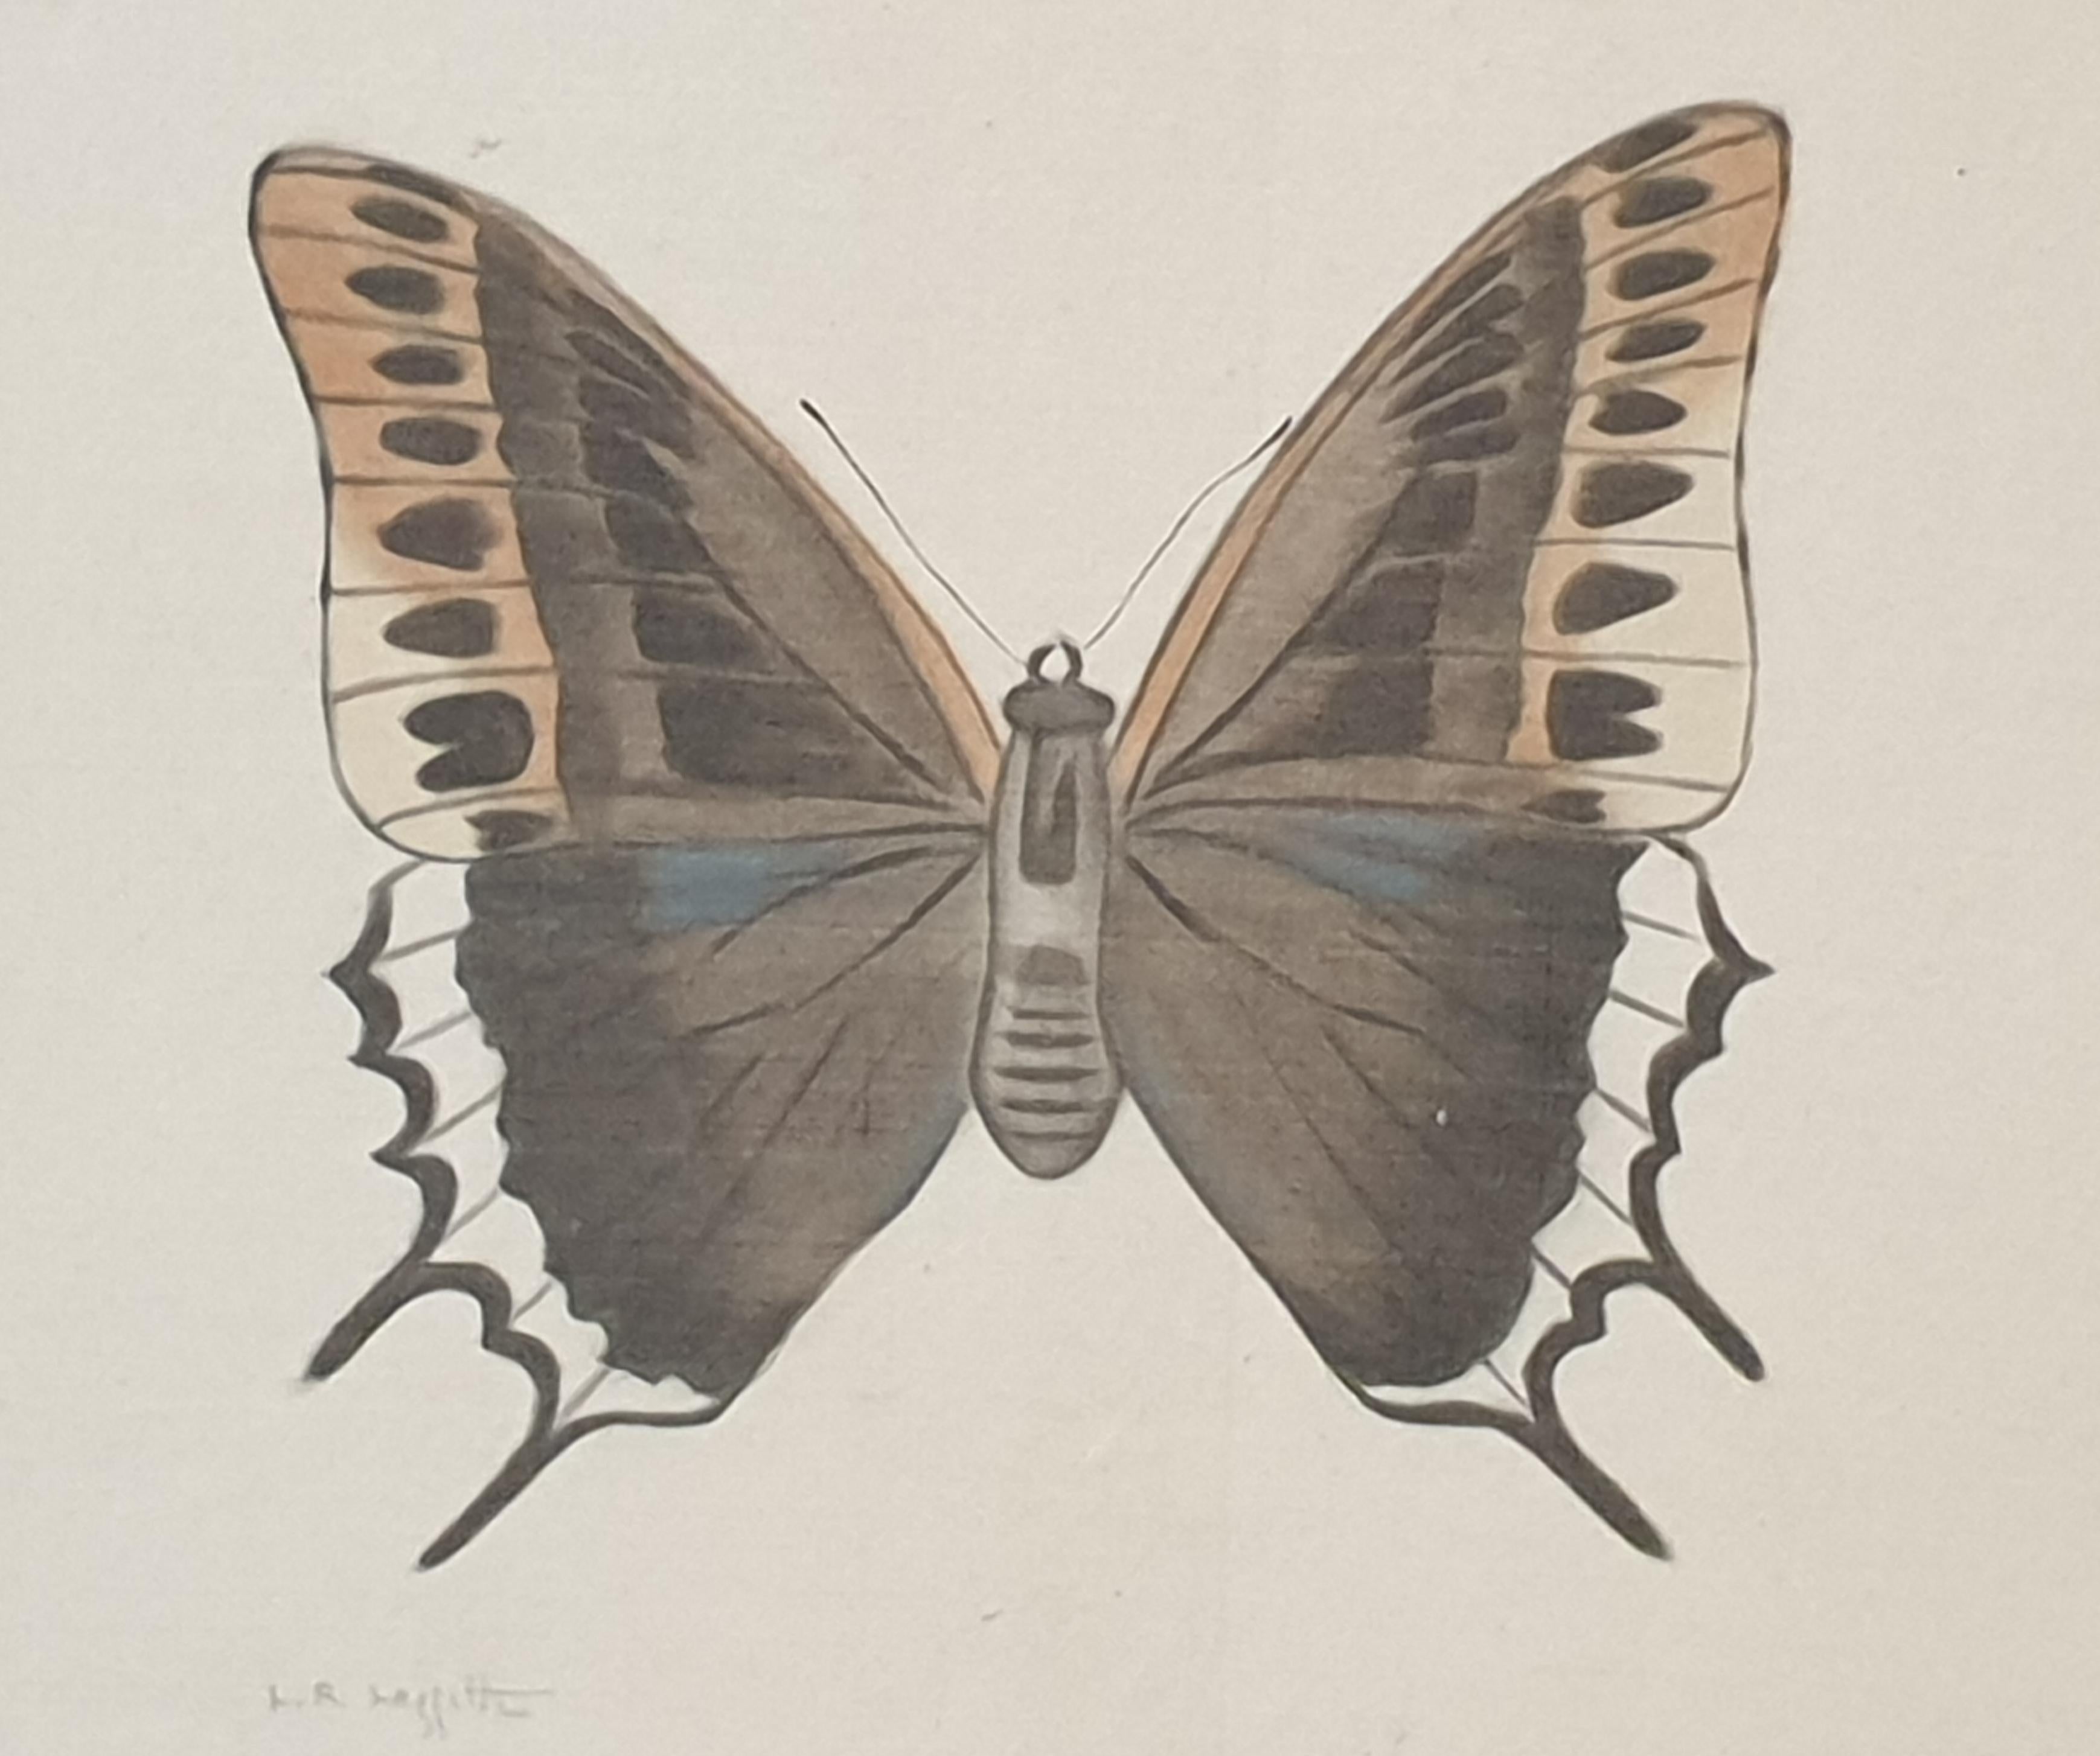 One from a set of four watercolours of butterflies on silk, applied to handmade paper, with hand cut edges, by French artist La Roche Laffitte. Signed bottom left. (The other 3 items are available separately)

A beautifully observed and detailed